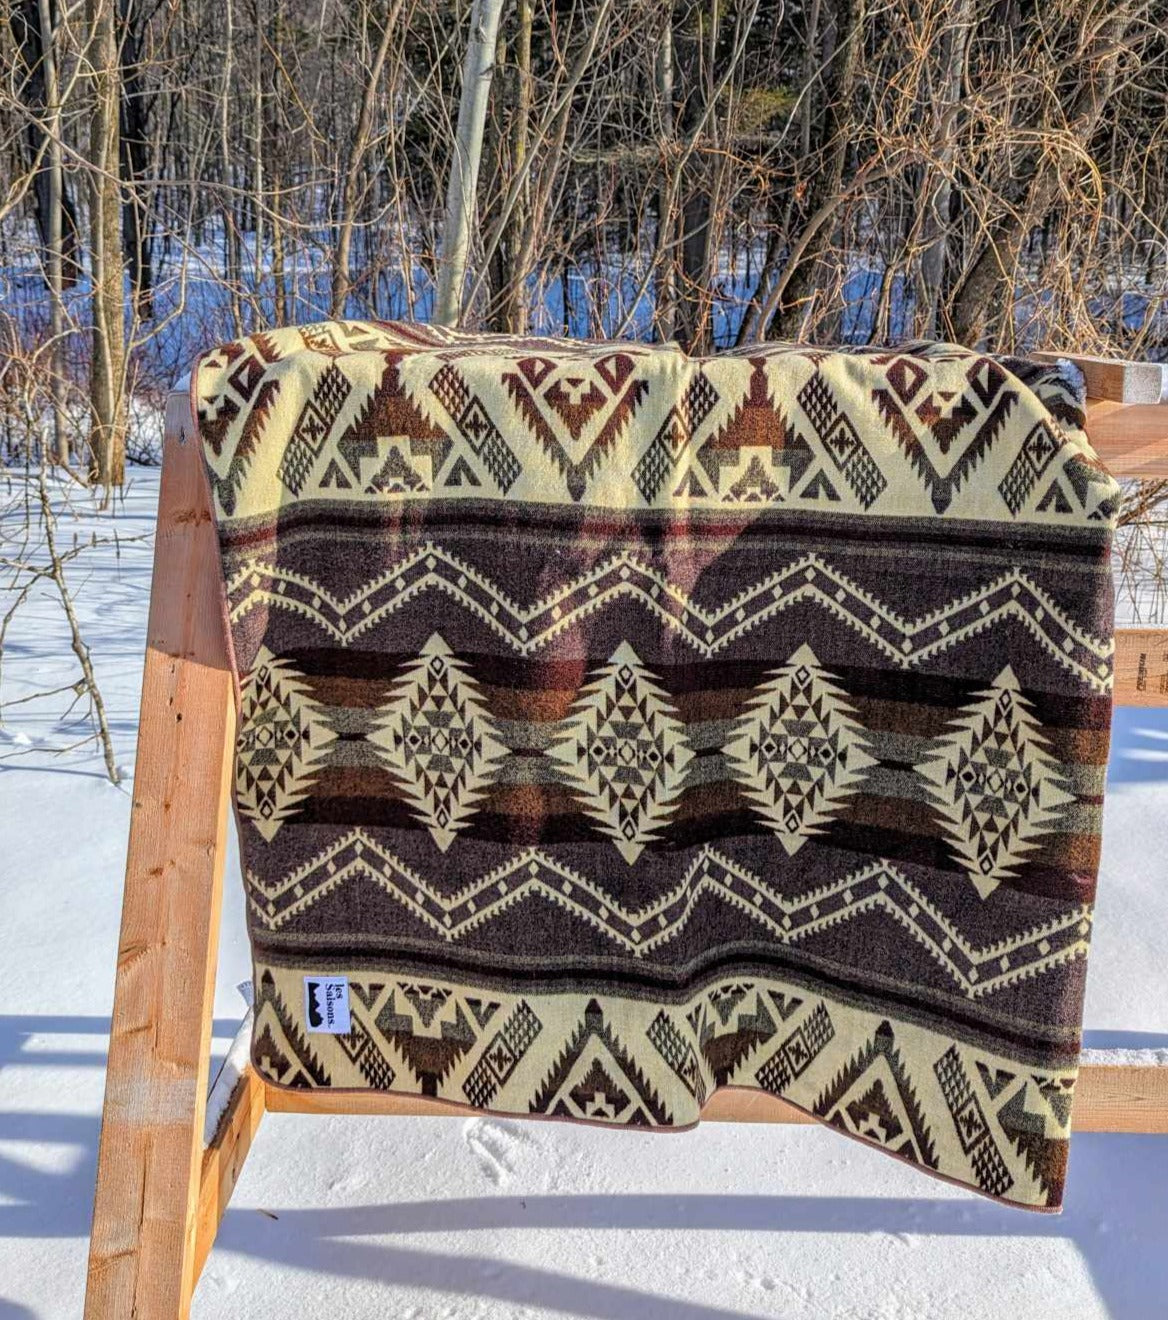 boho blanket colorful les Saisons. tones of brown, beige, white, red, camping blanket, warm, soft, acrylic, made in Ecuador, Large, picnic, vanlife, unique designs, reversible, light and foldable